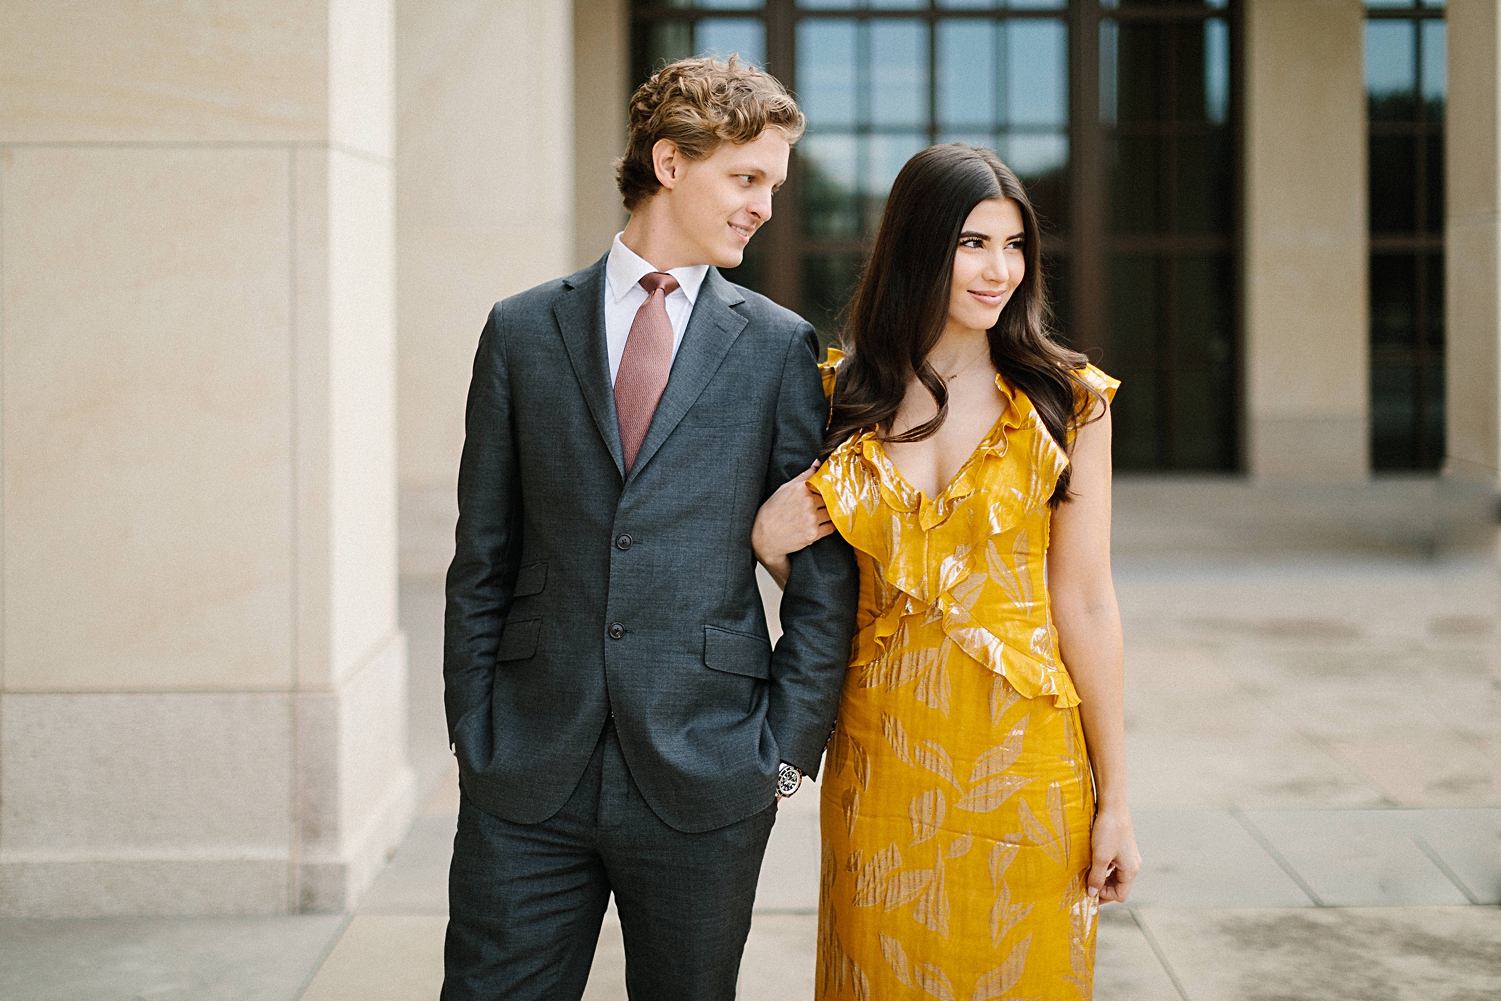 woman in yellow dress standing with man in suit in front of concrete pillars